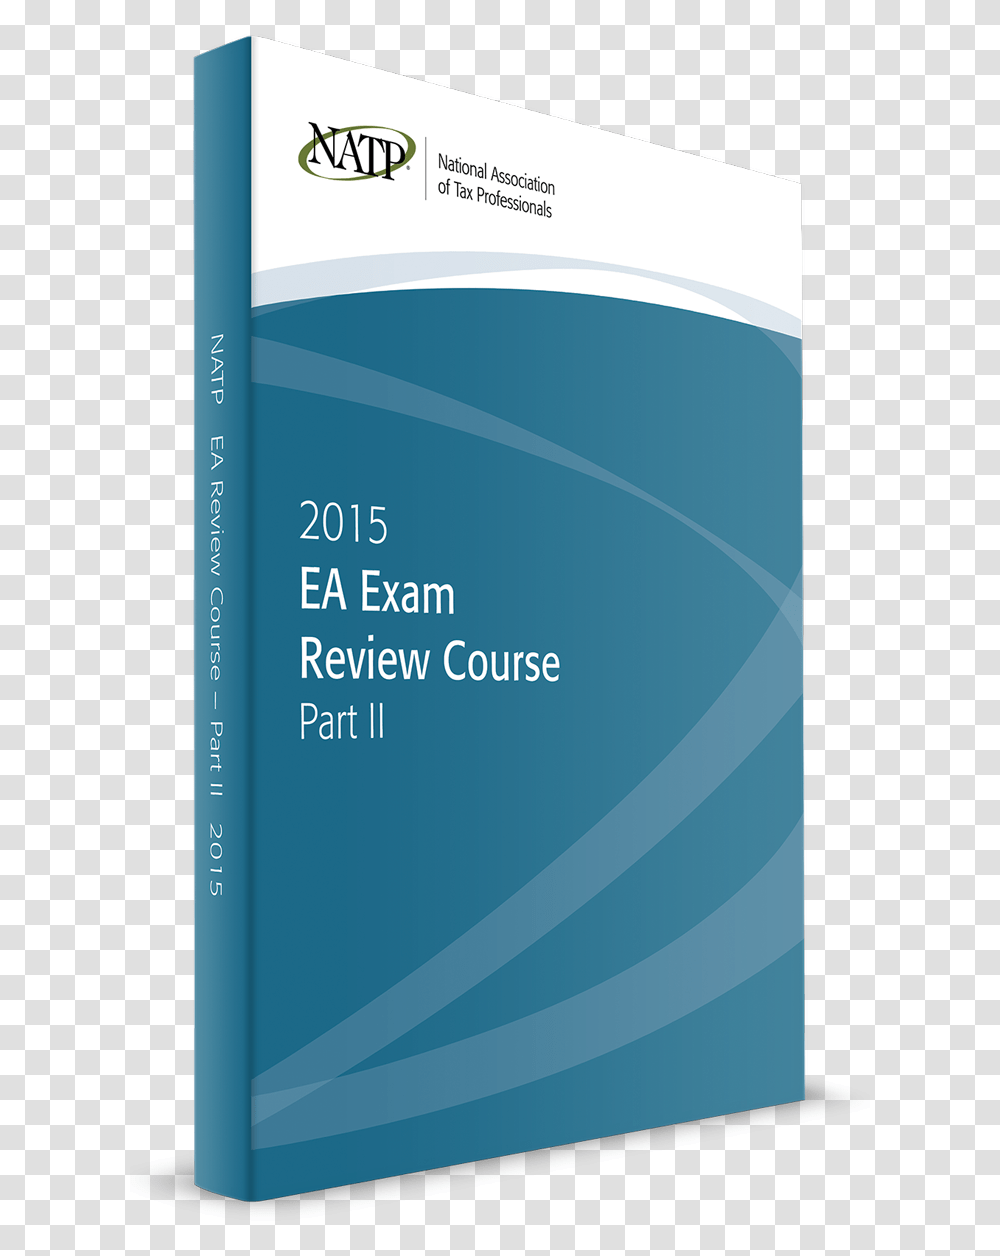 Ea Exam Review Course Part Ii Textbook Document, Advertisement, Poster, Flyer, Paper Transparent Png